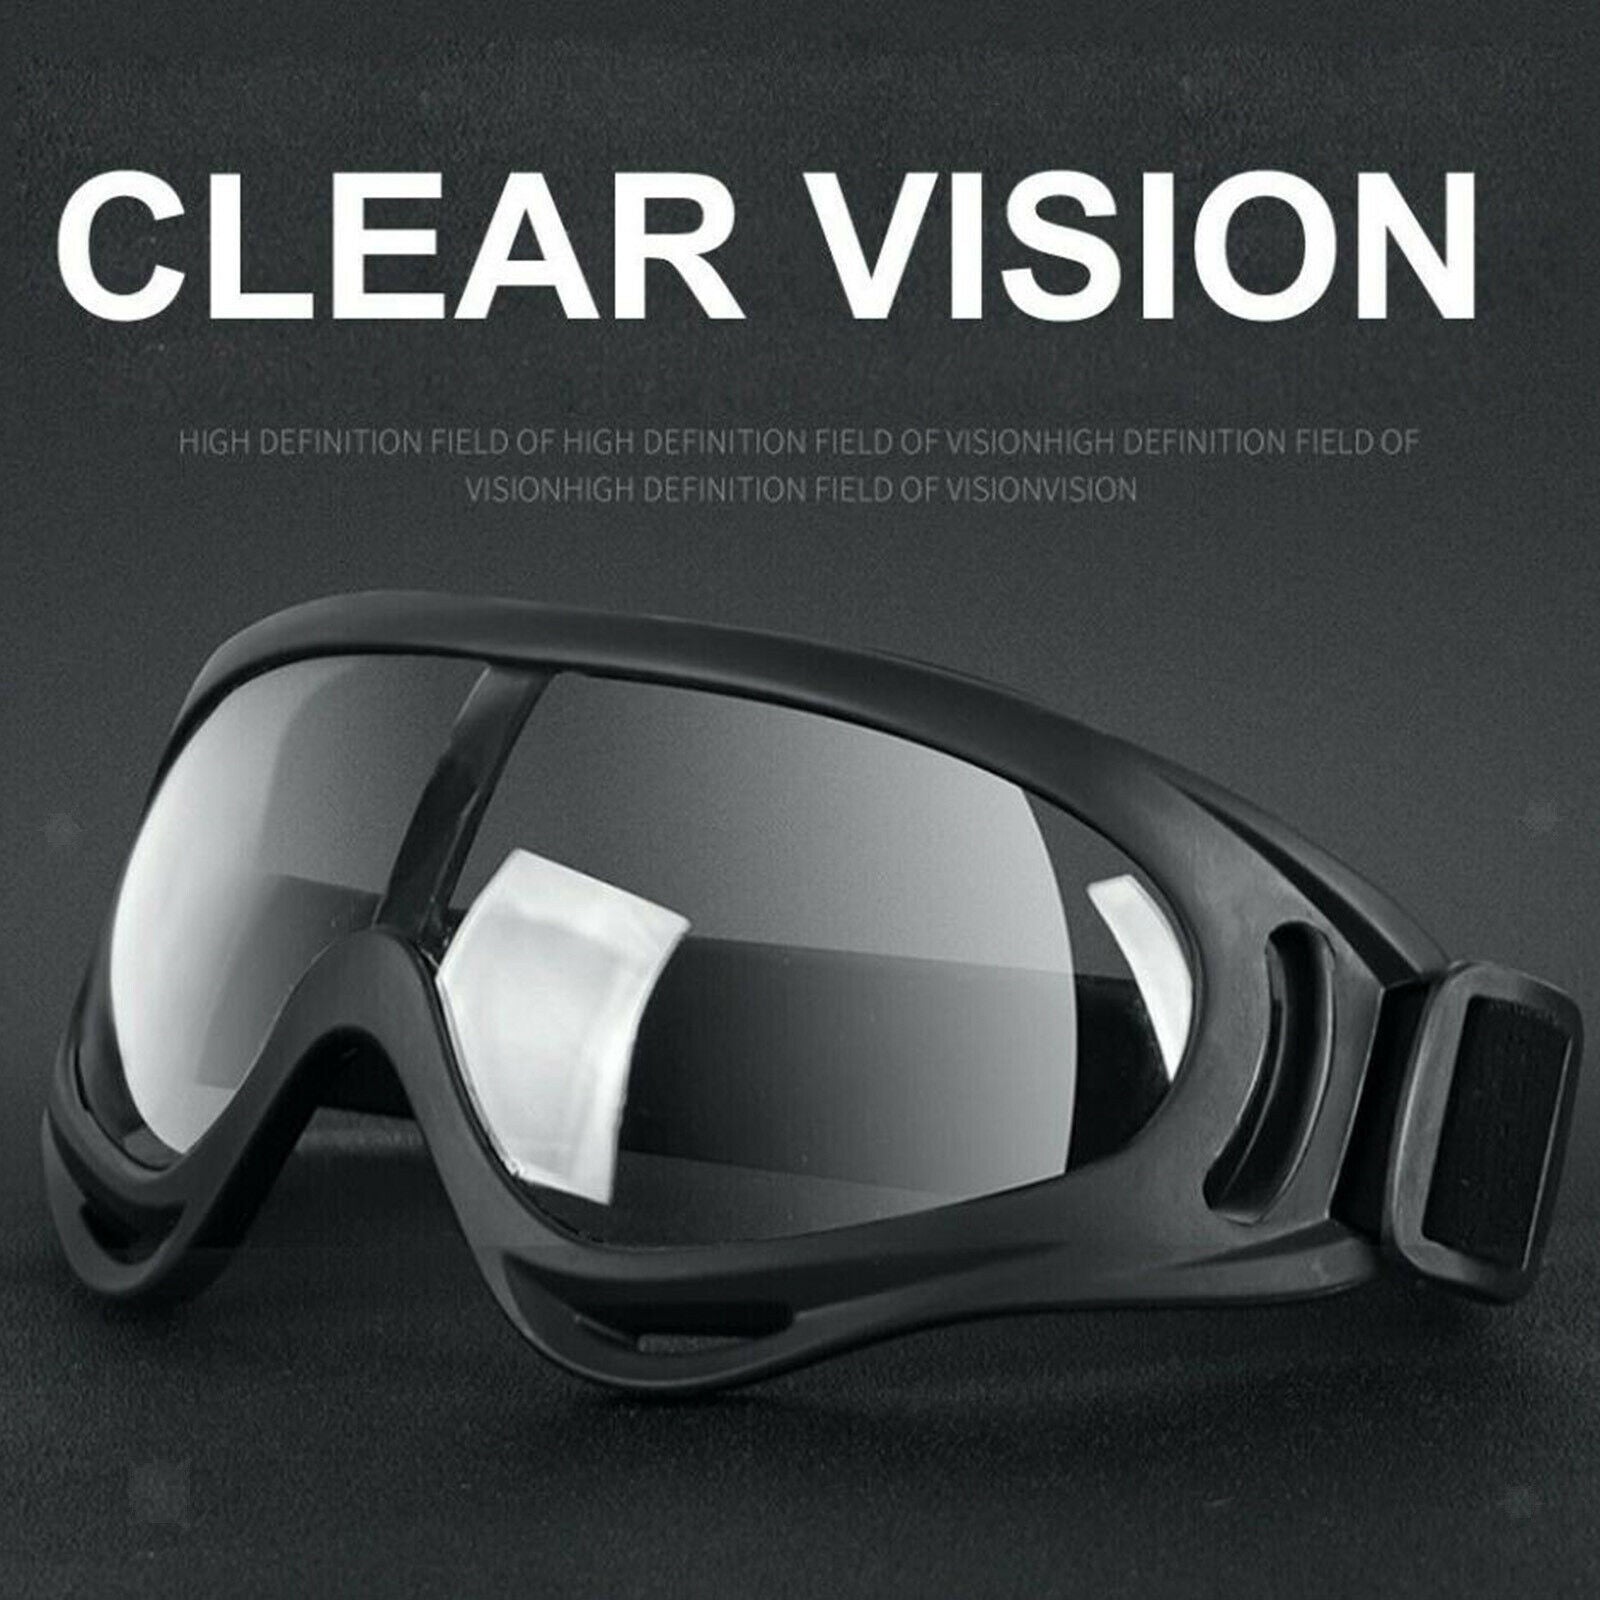 Motorcycle Chemical Splash Safety Goggles Anti Fog Protective for Lab Work